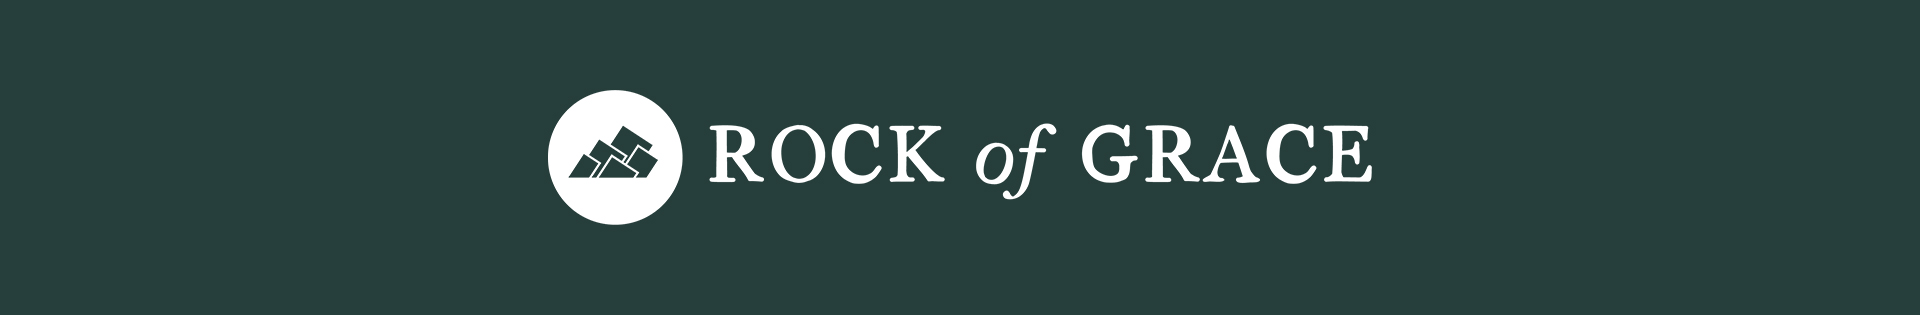 Rock of Grace Family Ministries